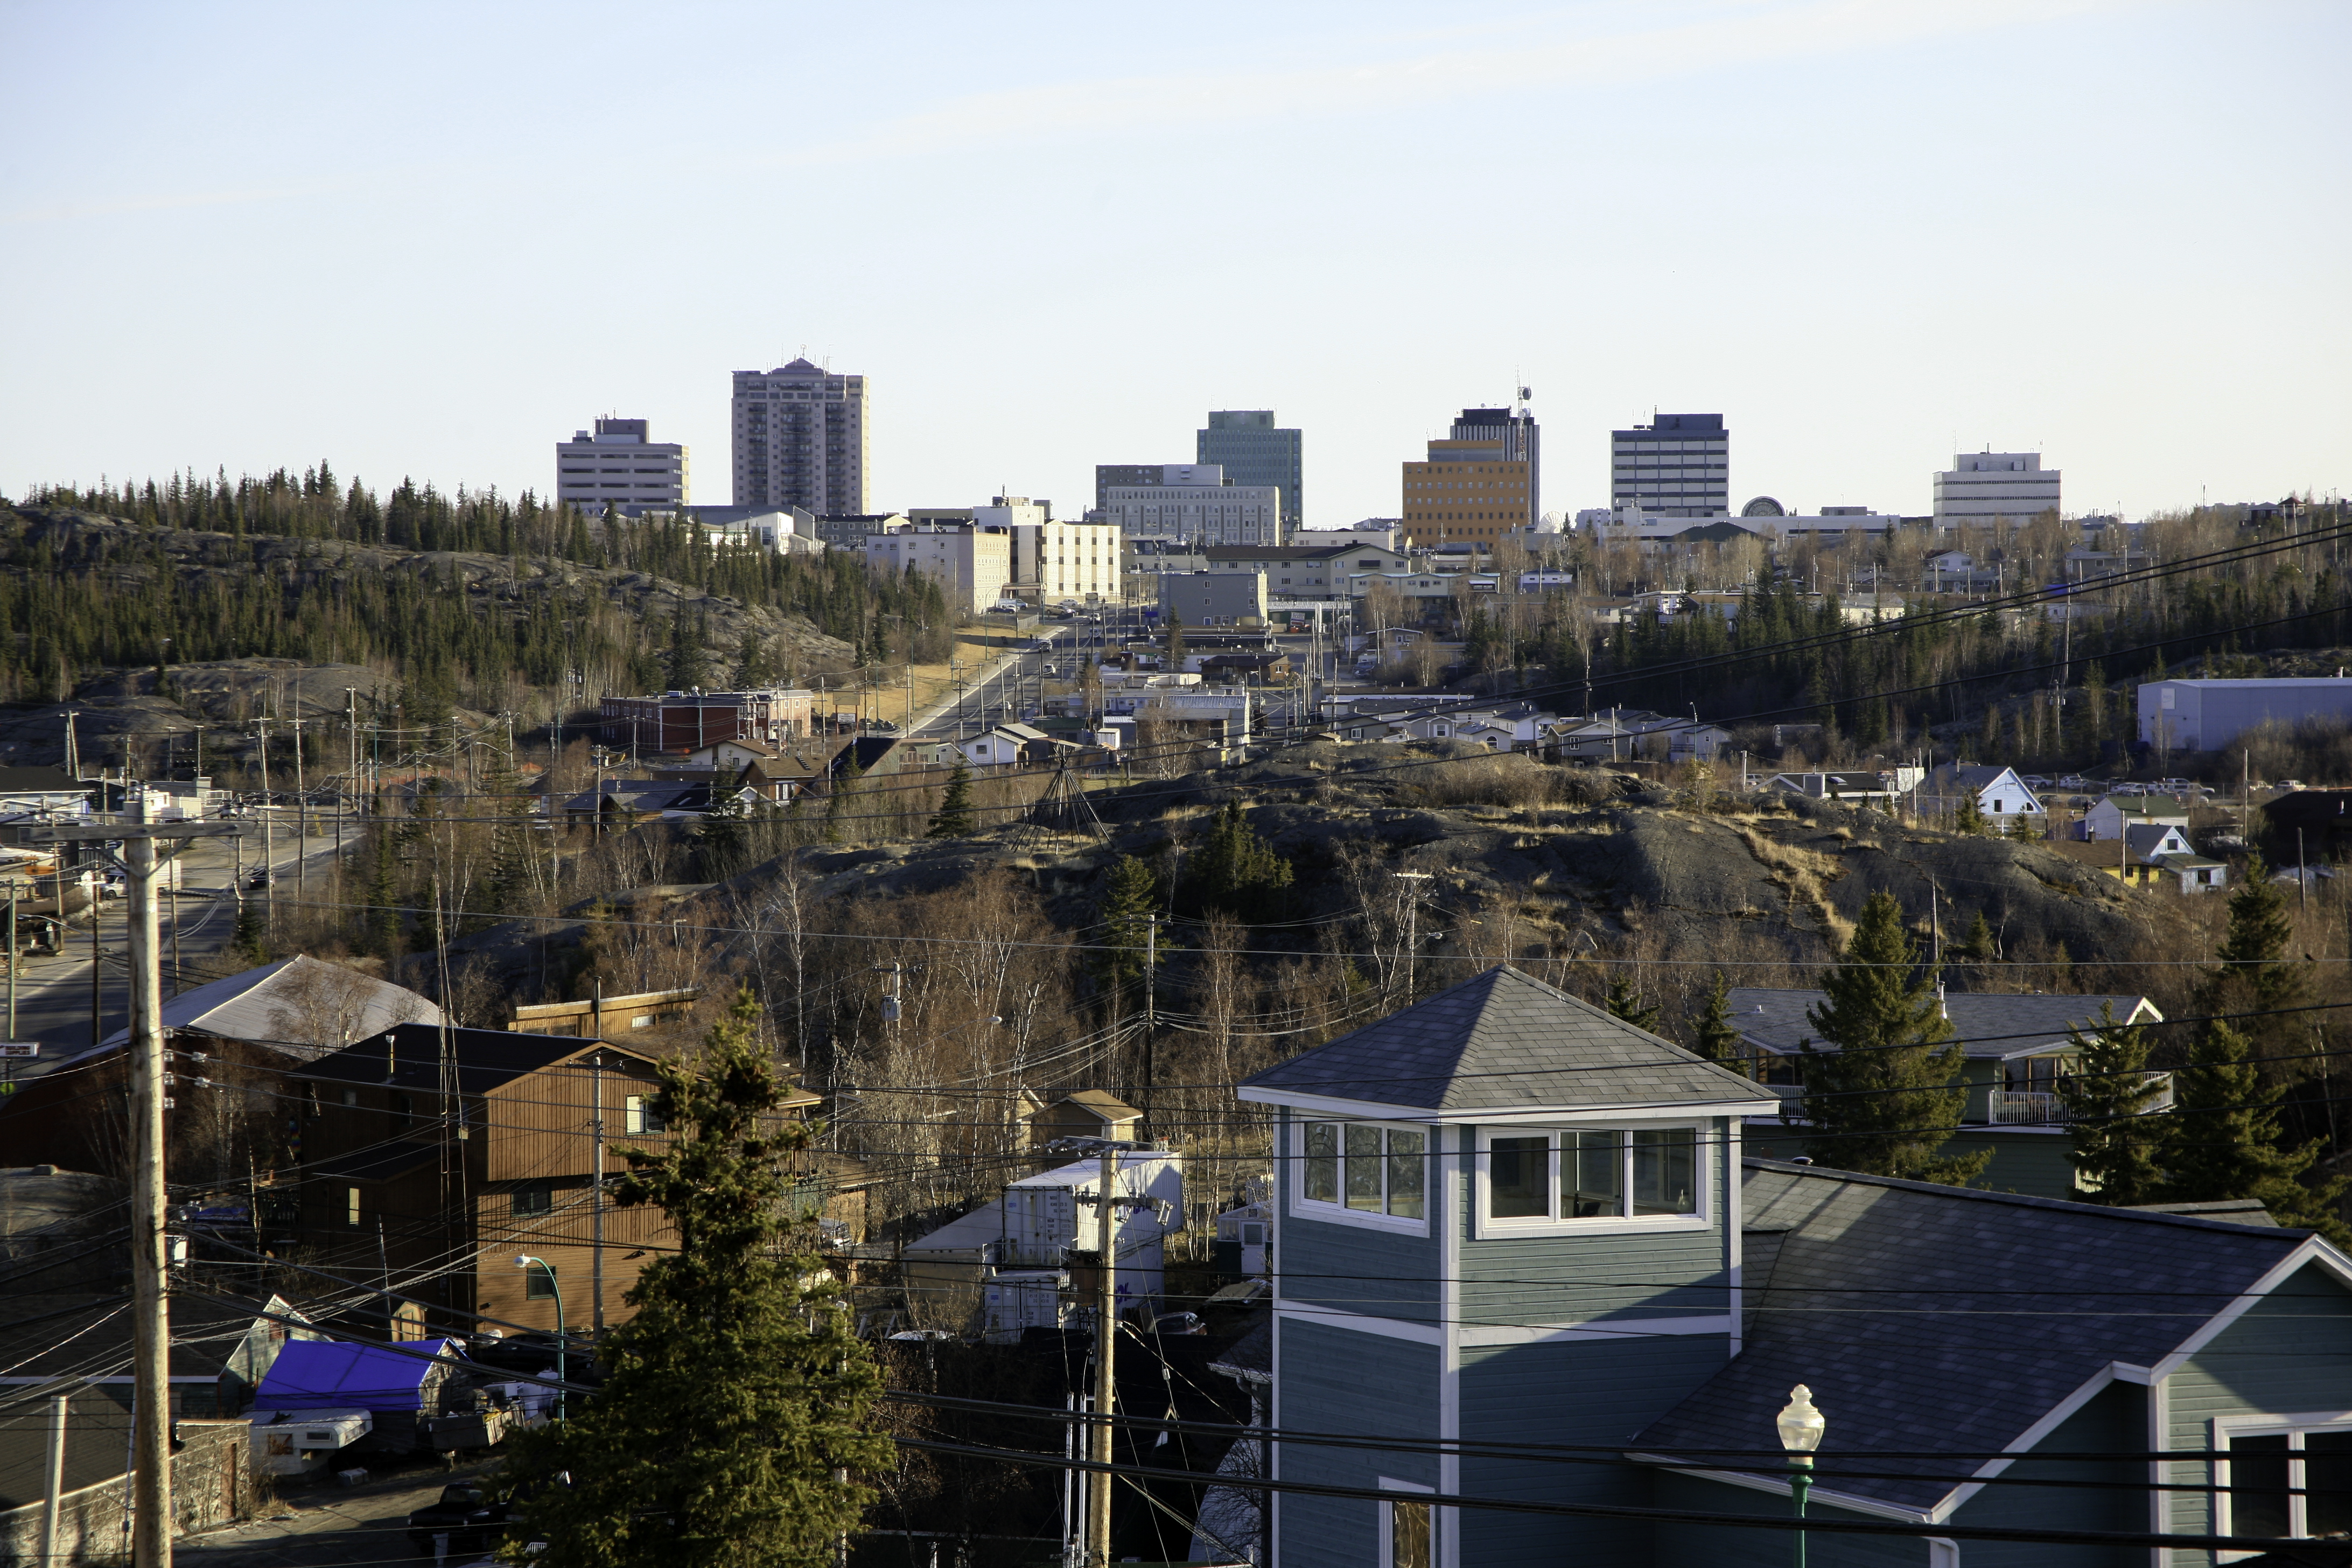 Skyline of Yellowknife with residential houses in the foreground. (Getty)